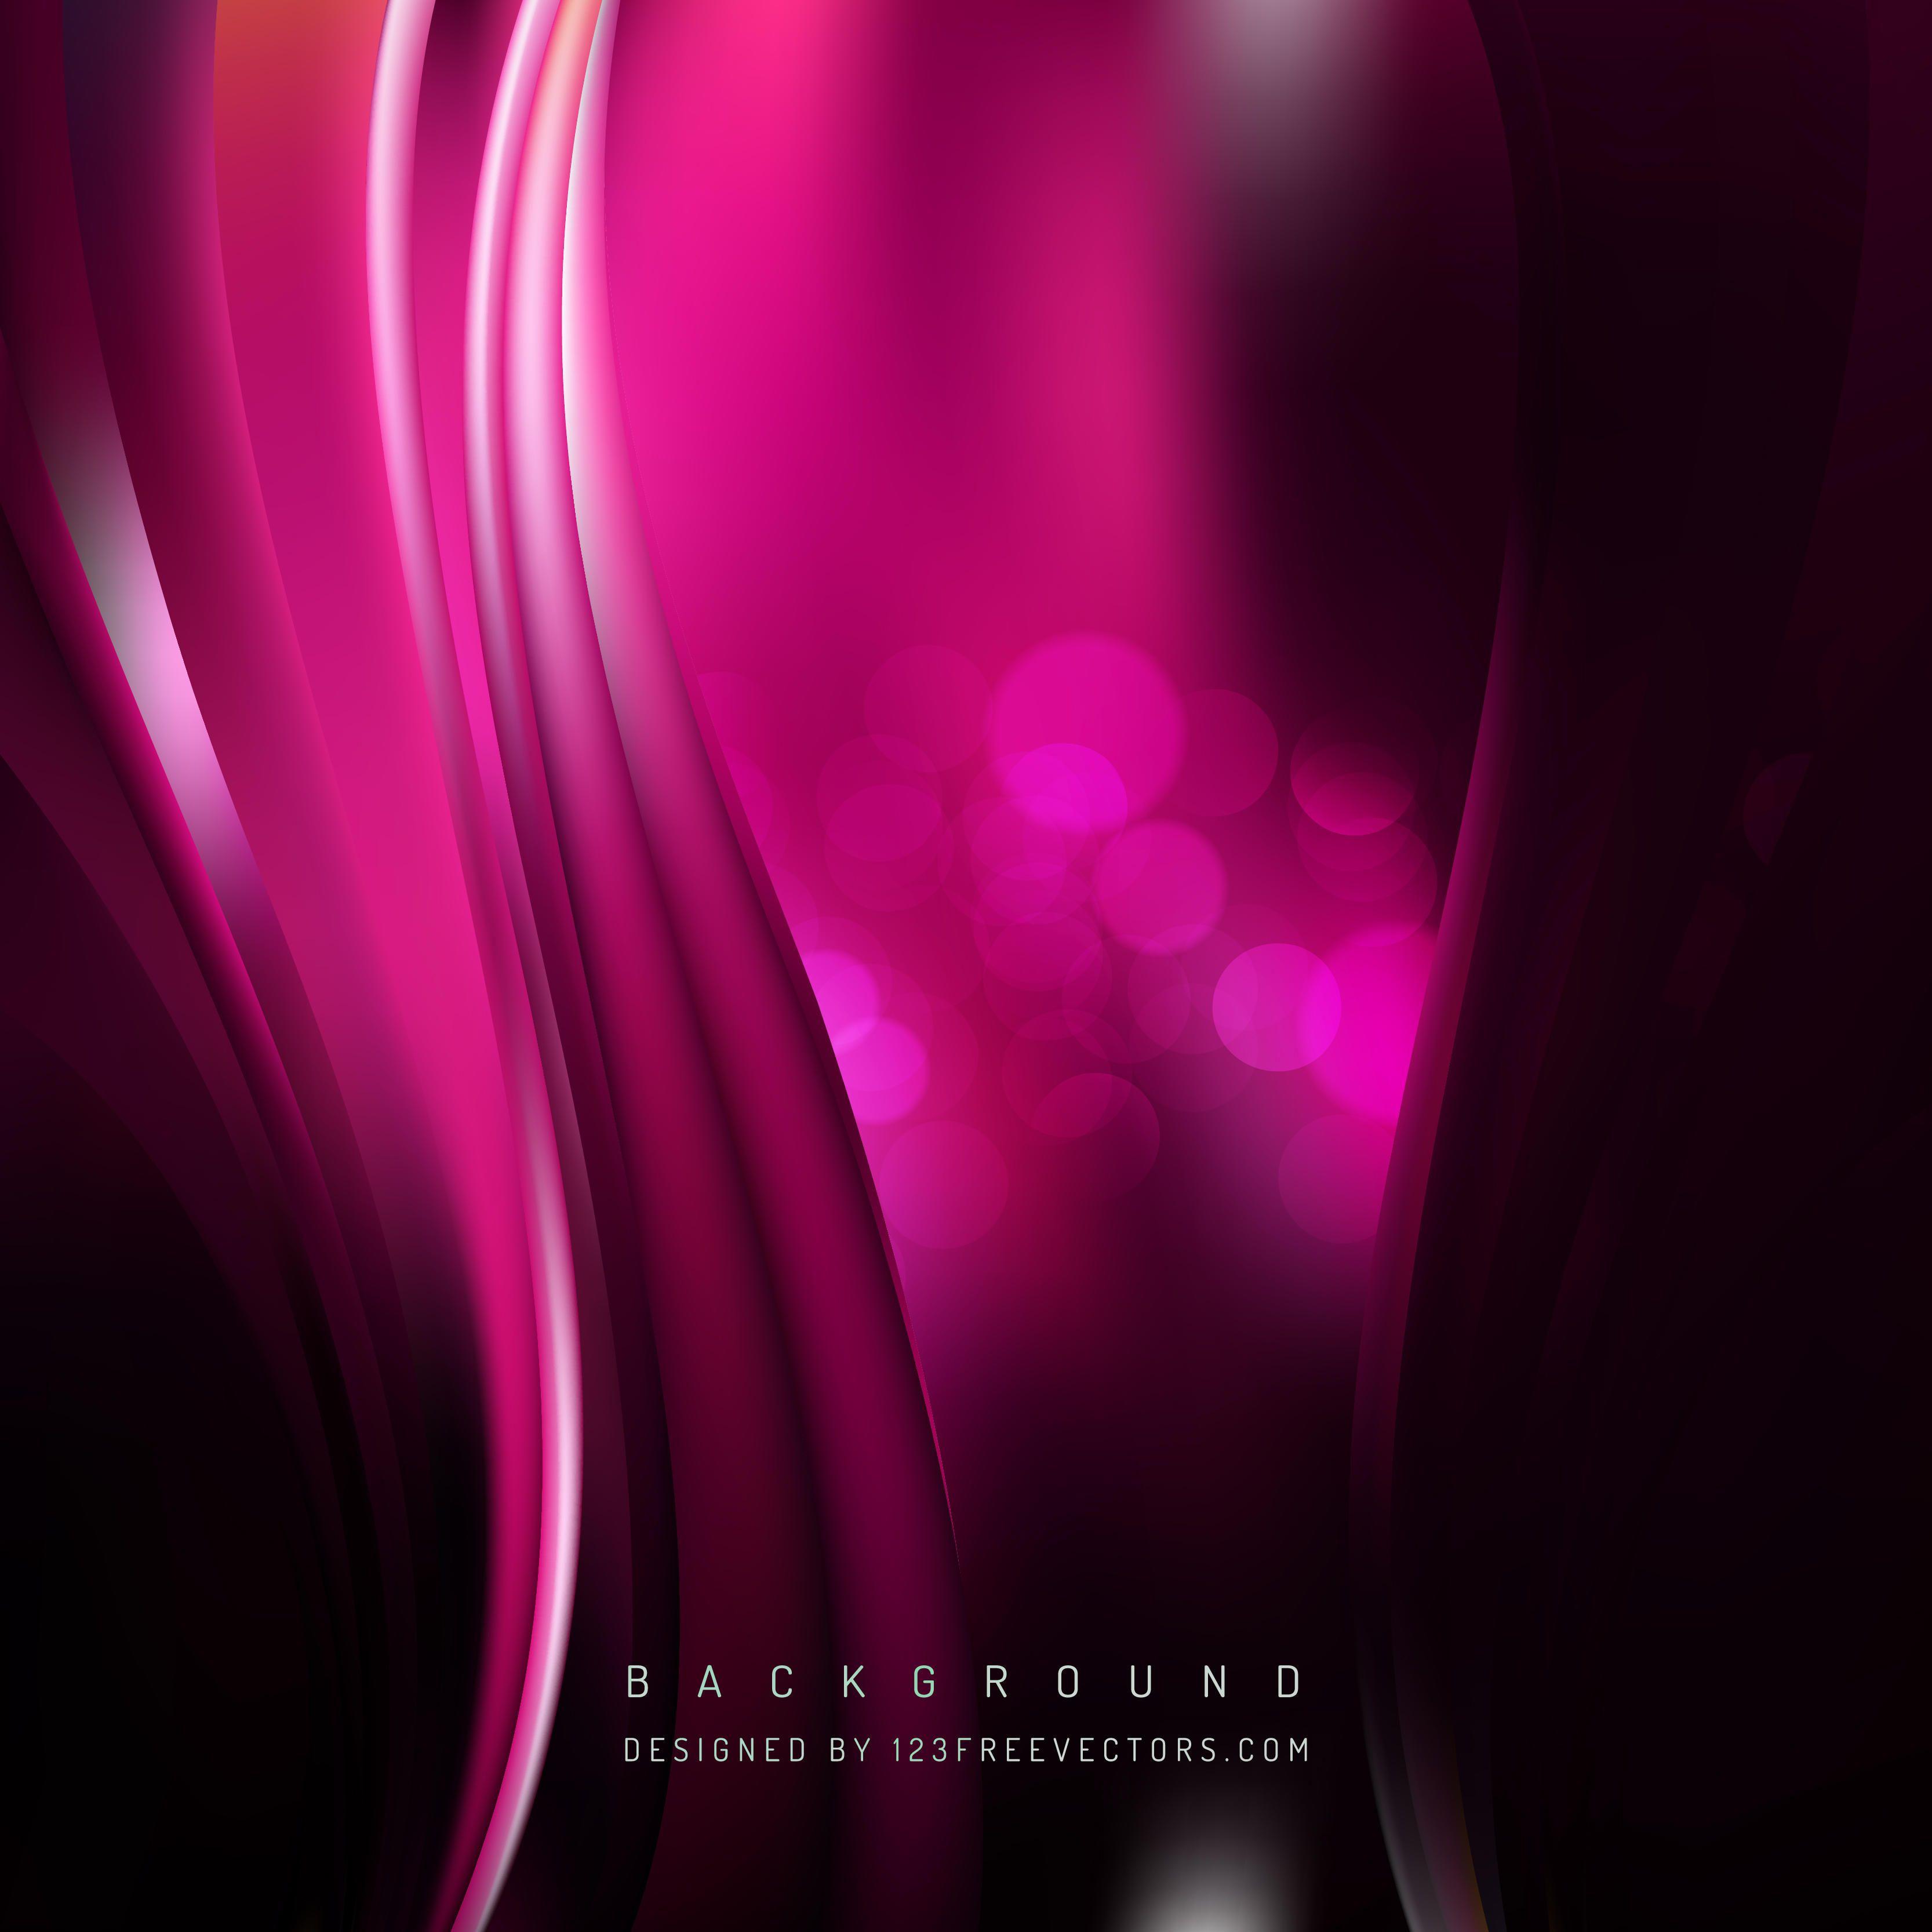 Abstract Black Pink Wave Design BackgroundFreevectors